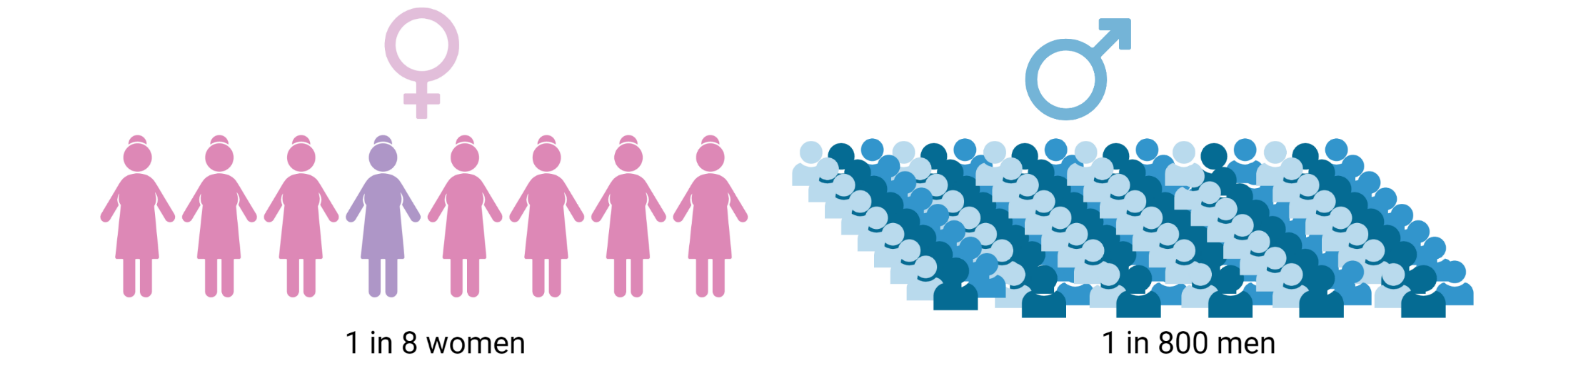 Figure 1. Breast cancer prevalence according to gender.